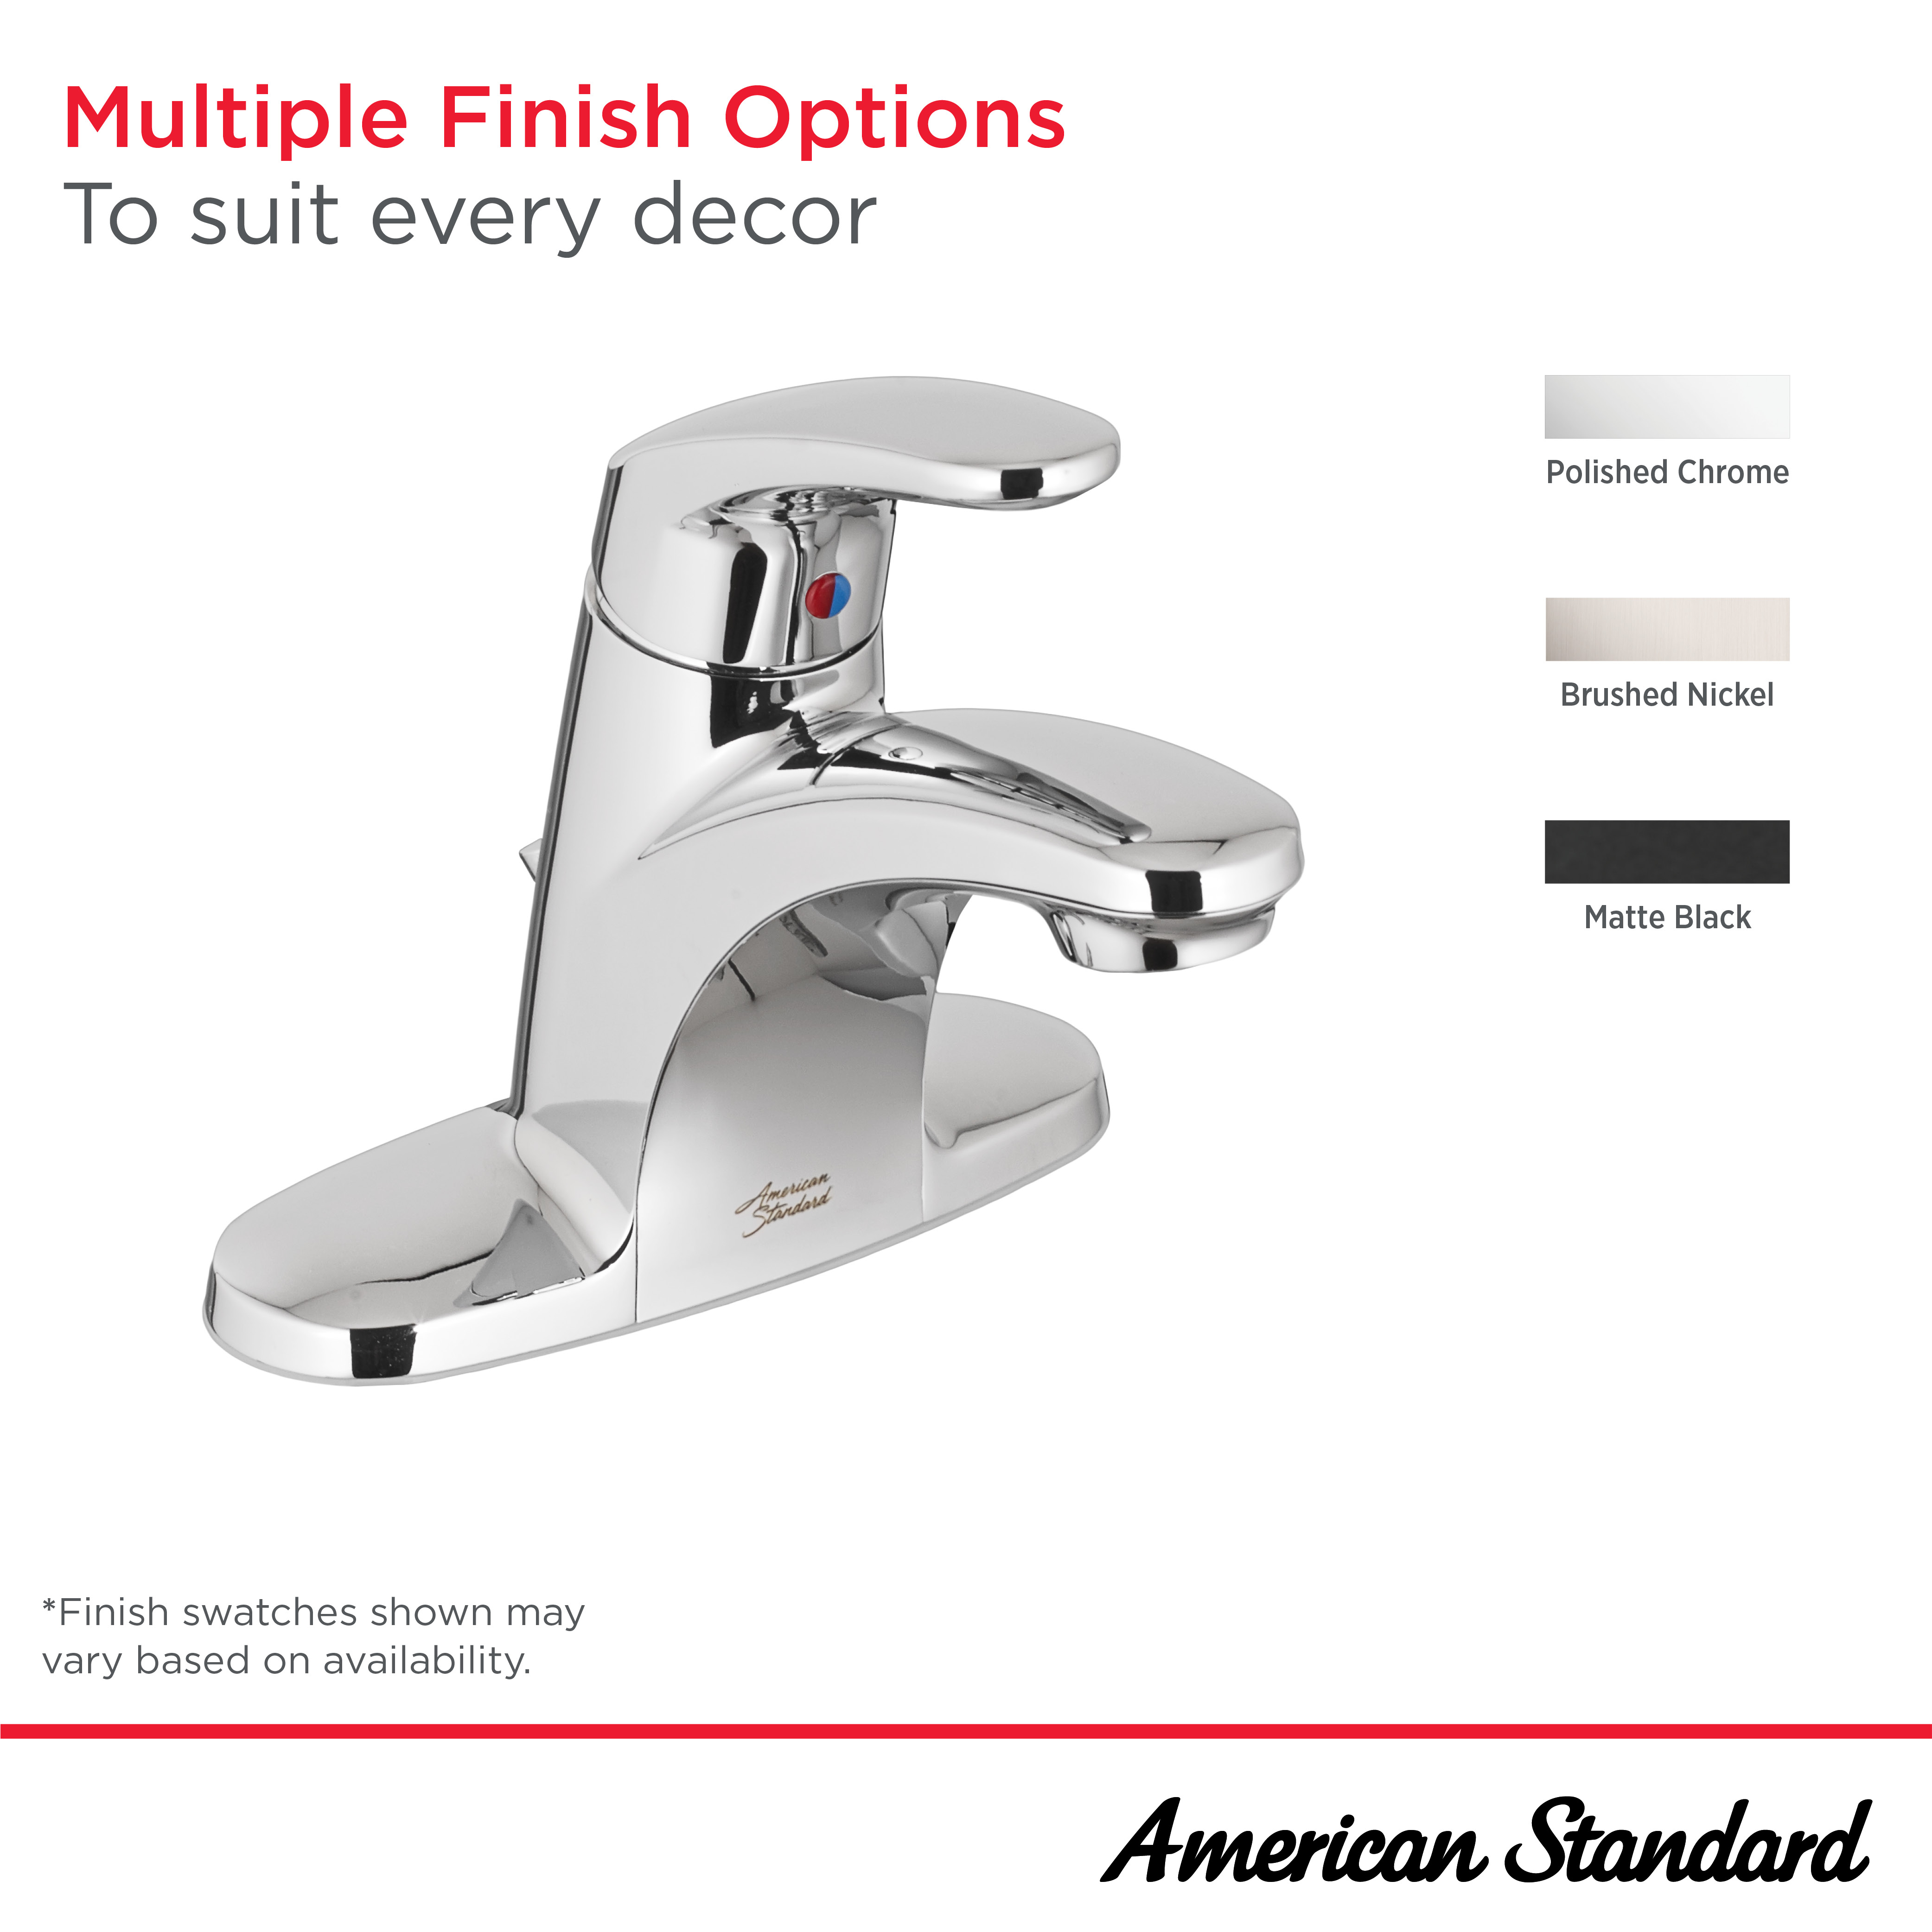 Colony® PRO 4-Inch Centerset Single-Handle Bathroom Faucet 1.2 gpm/4.5 Lpm With Lever Handle